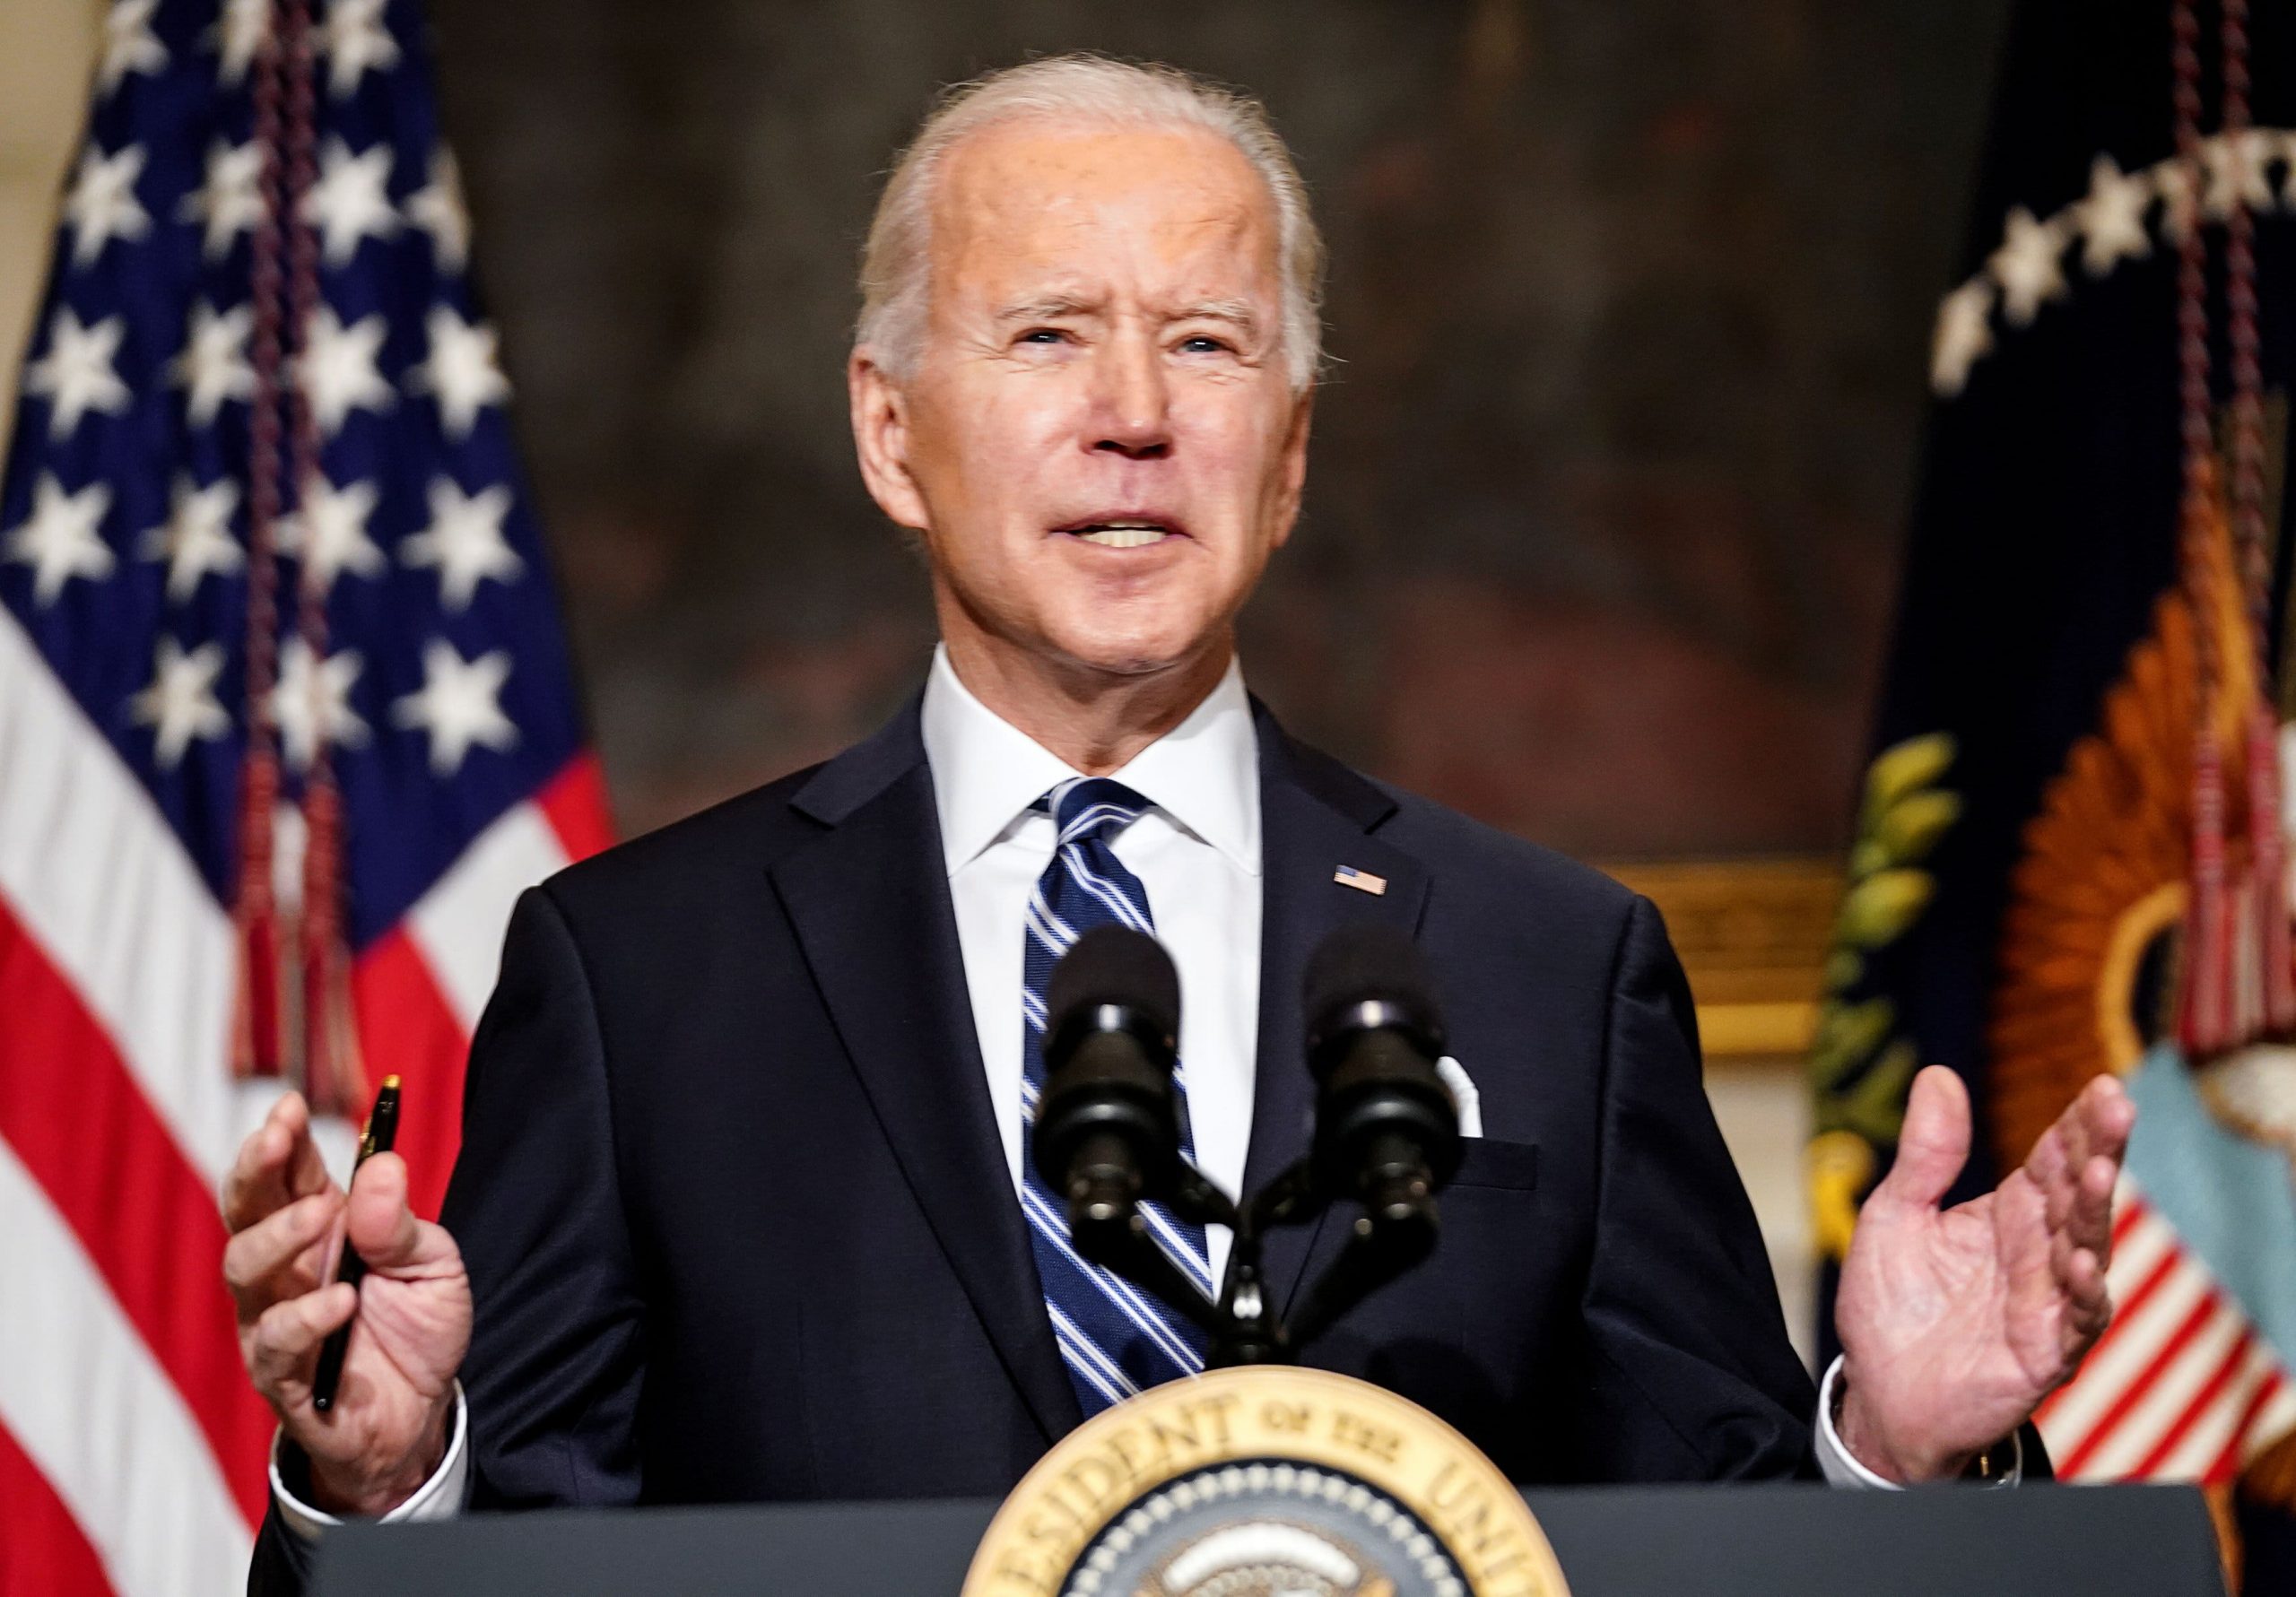 Biden’s local weather change agenda to face obstacles with Senate